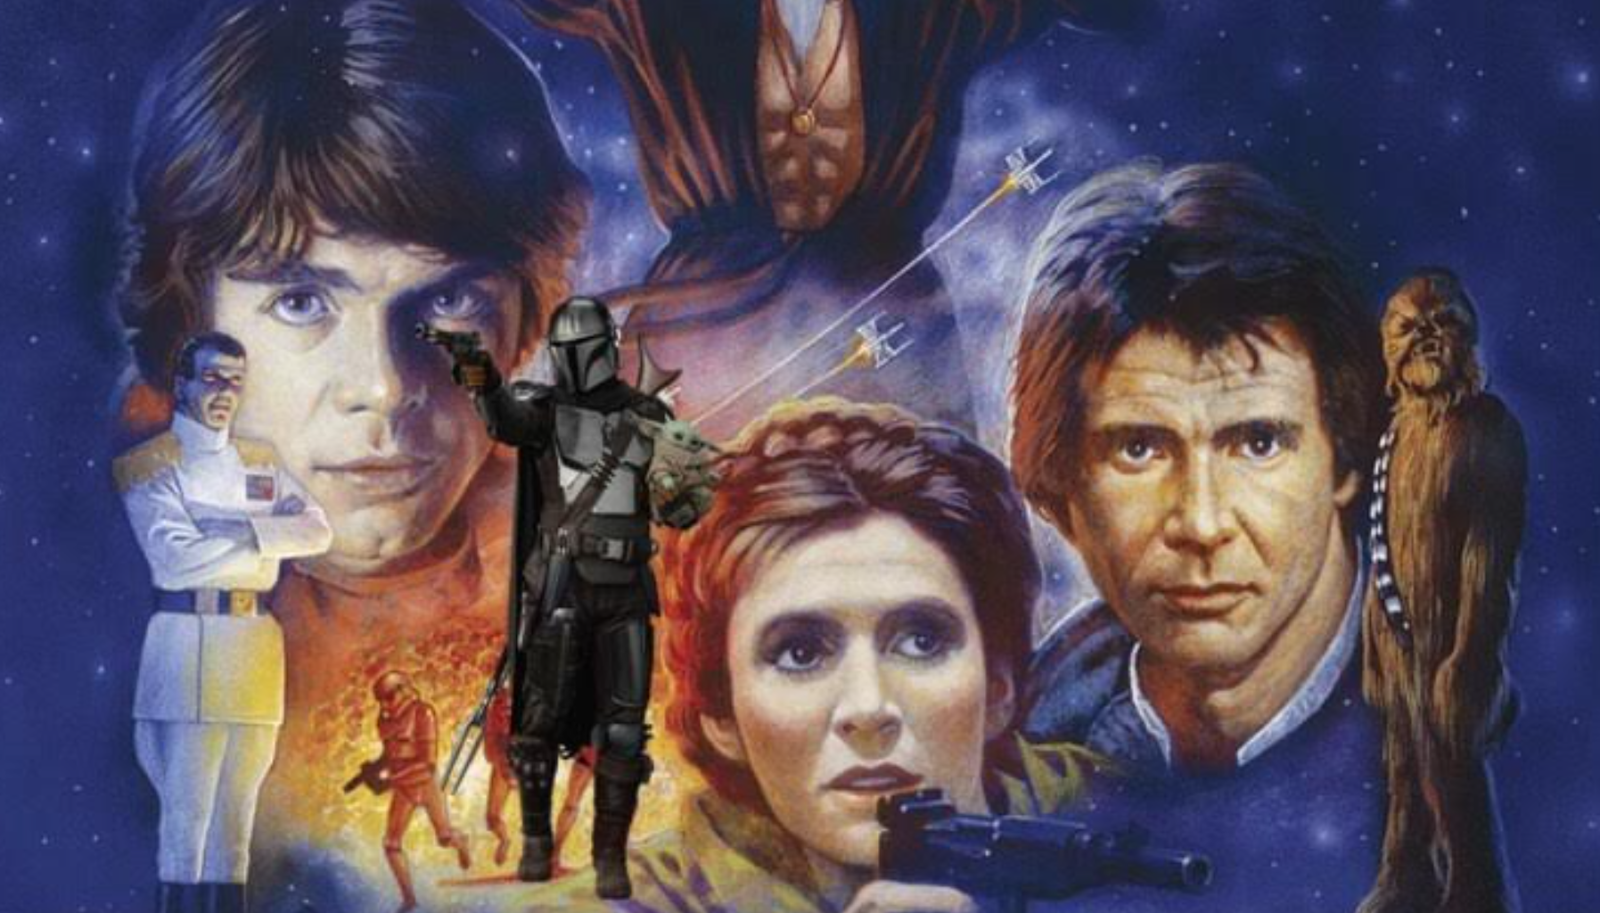 Could The Mandalorian Crossover Be an Heir to the Empire Adaptation?